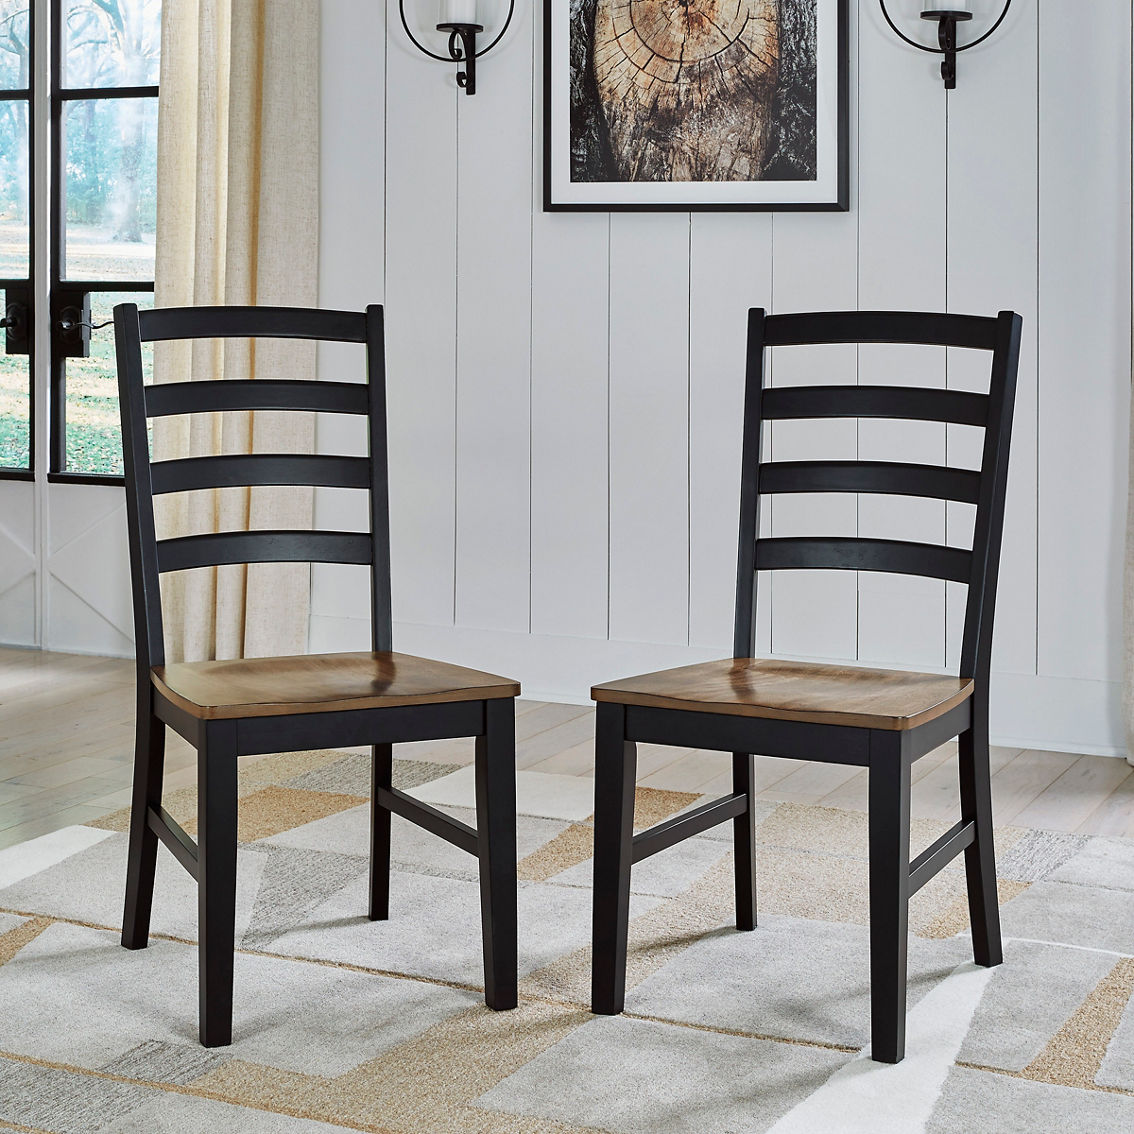 Signature Design by Ashley Wildenauer 5 pc. Dining Set: Table, 4 Chairs - Image 3 of 5